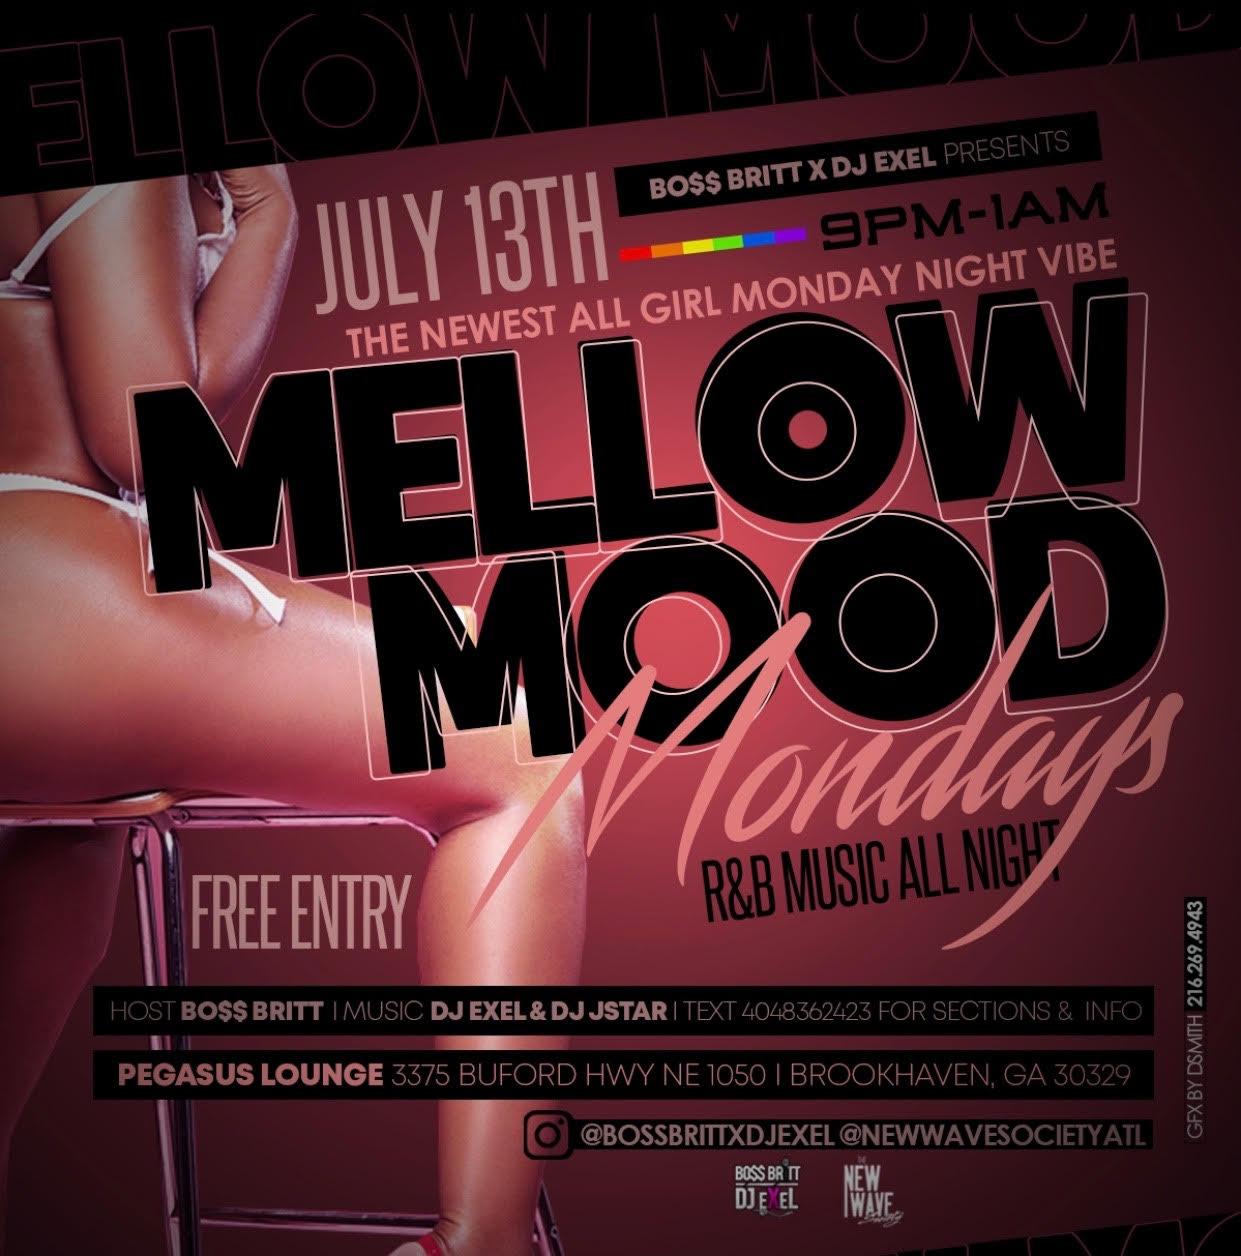 Mellow Mood Mondays : R&B Music All Night - #1 All Girl Party In ATL